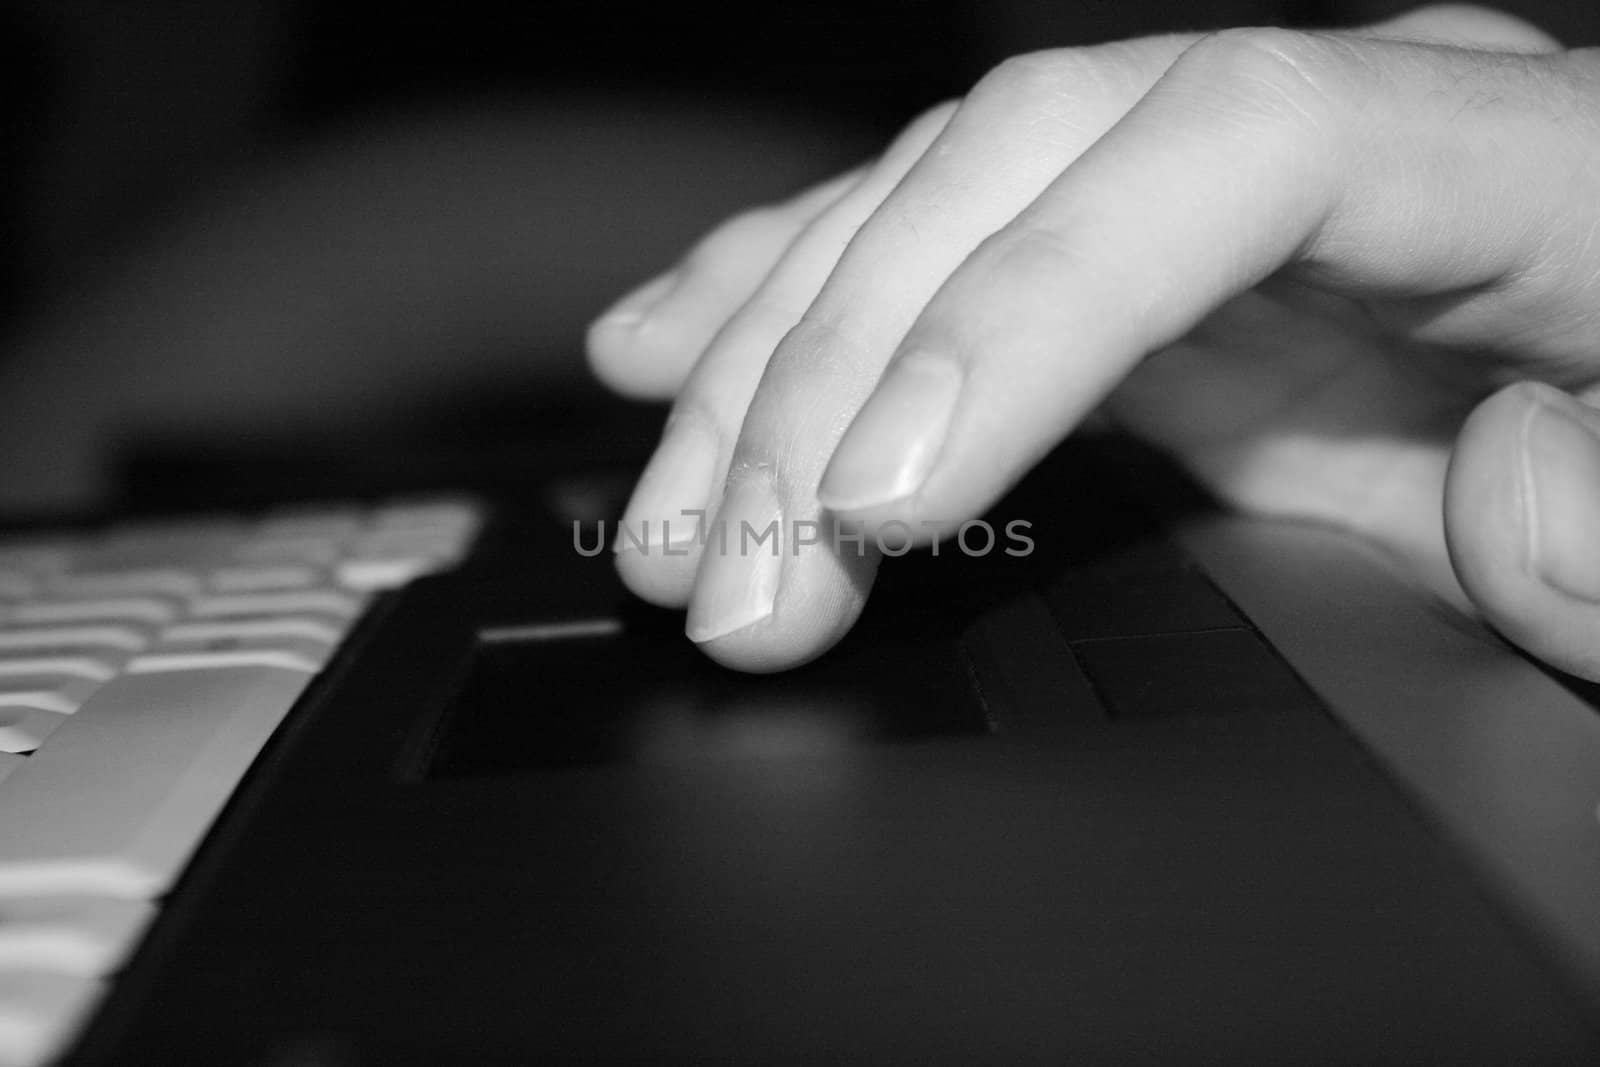 Fingers touching a notebook touchpad